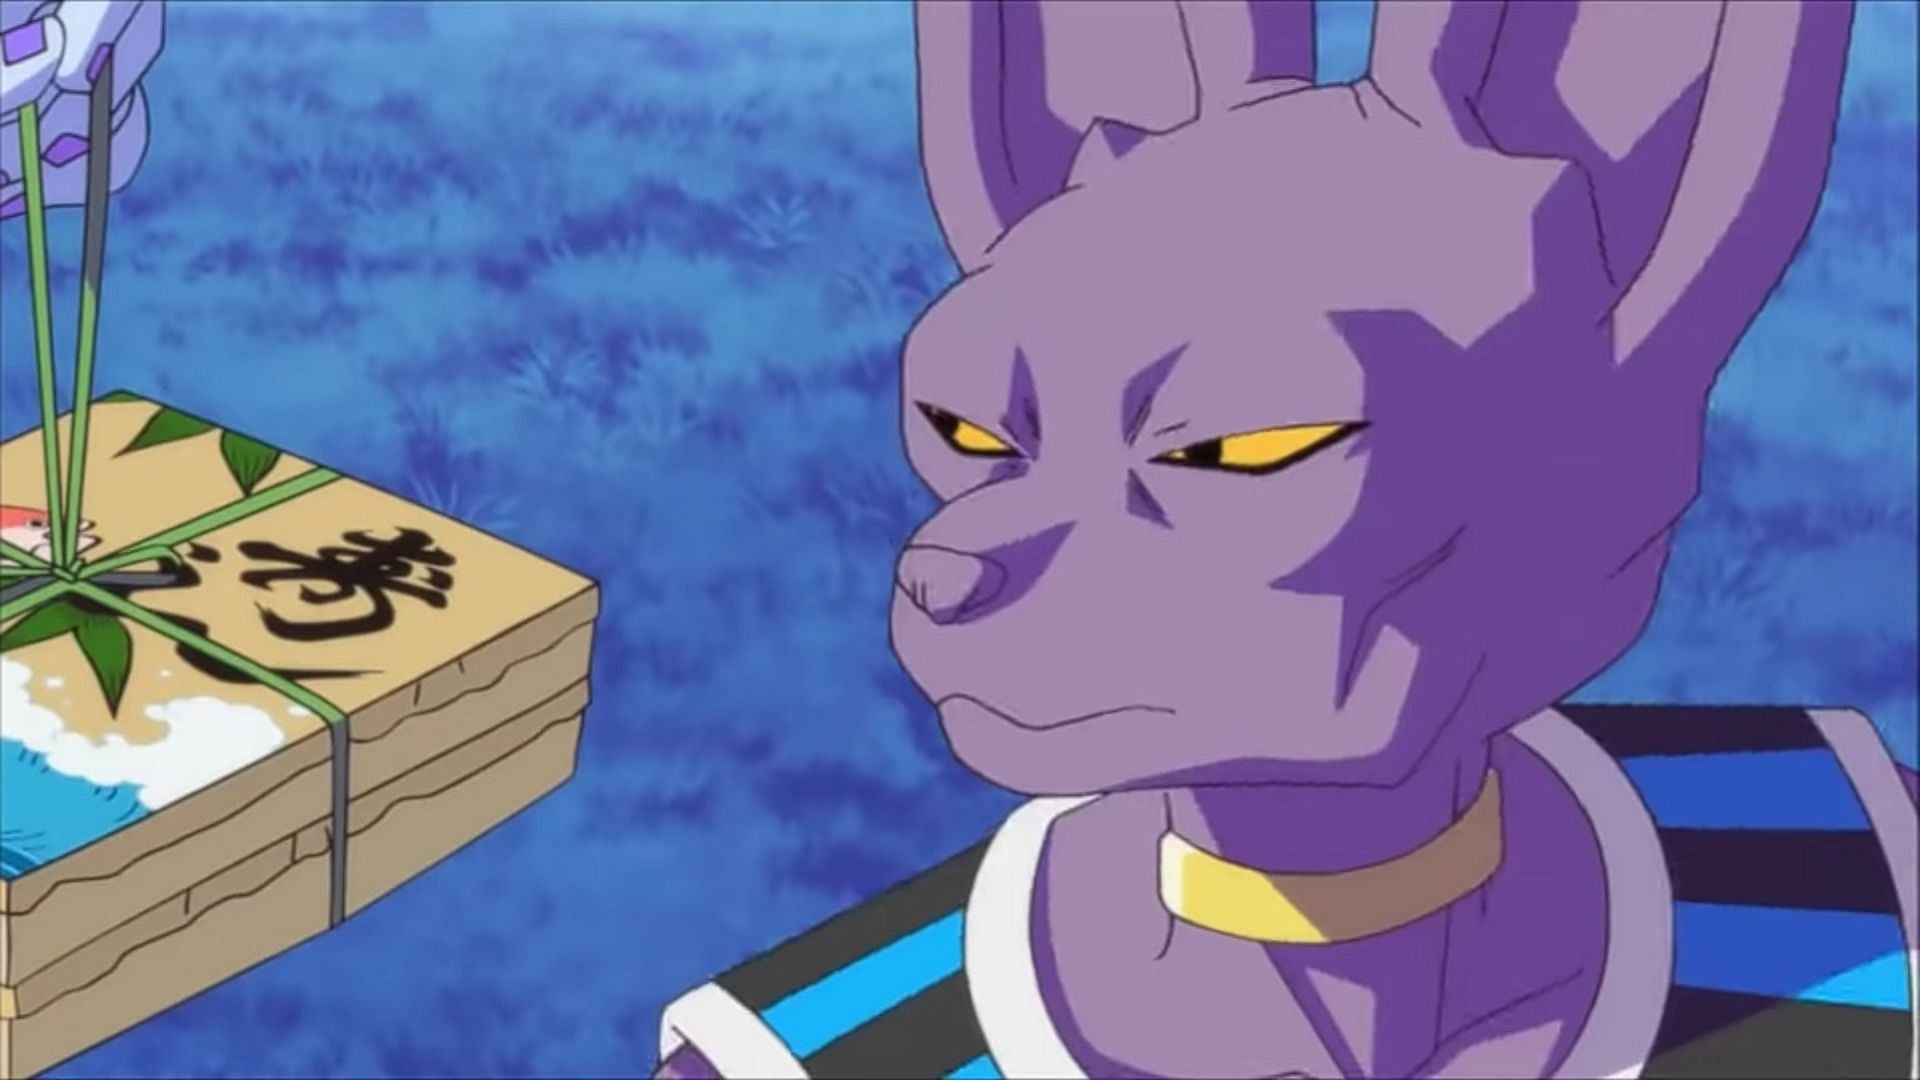 Beerus as seen in the anime (Image courtesy: Toei Animationtion)